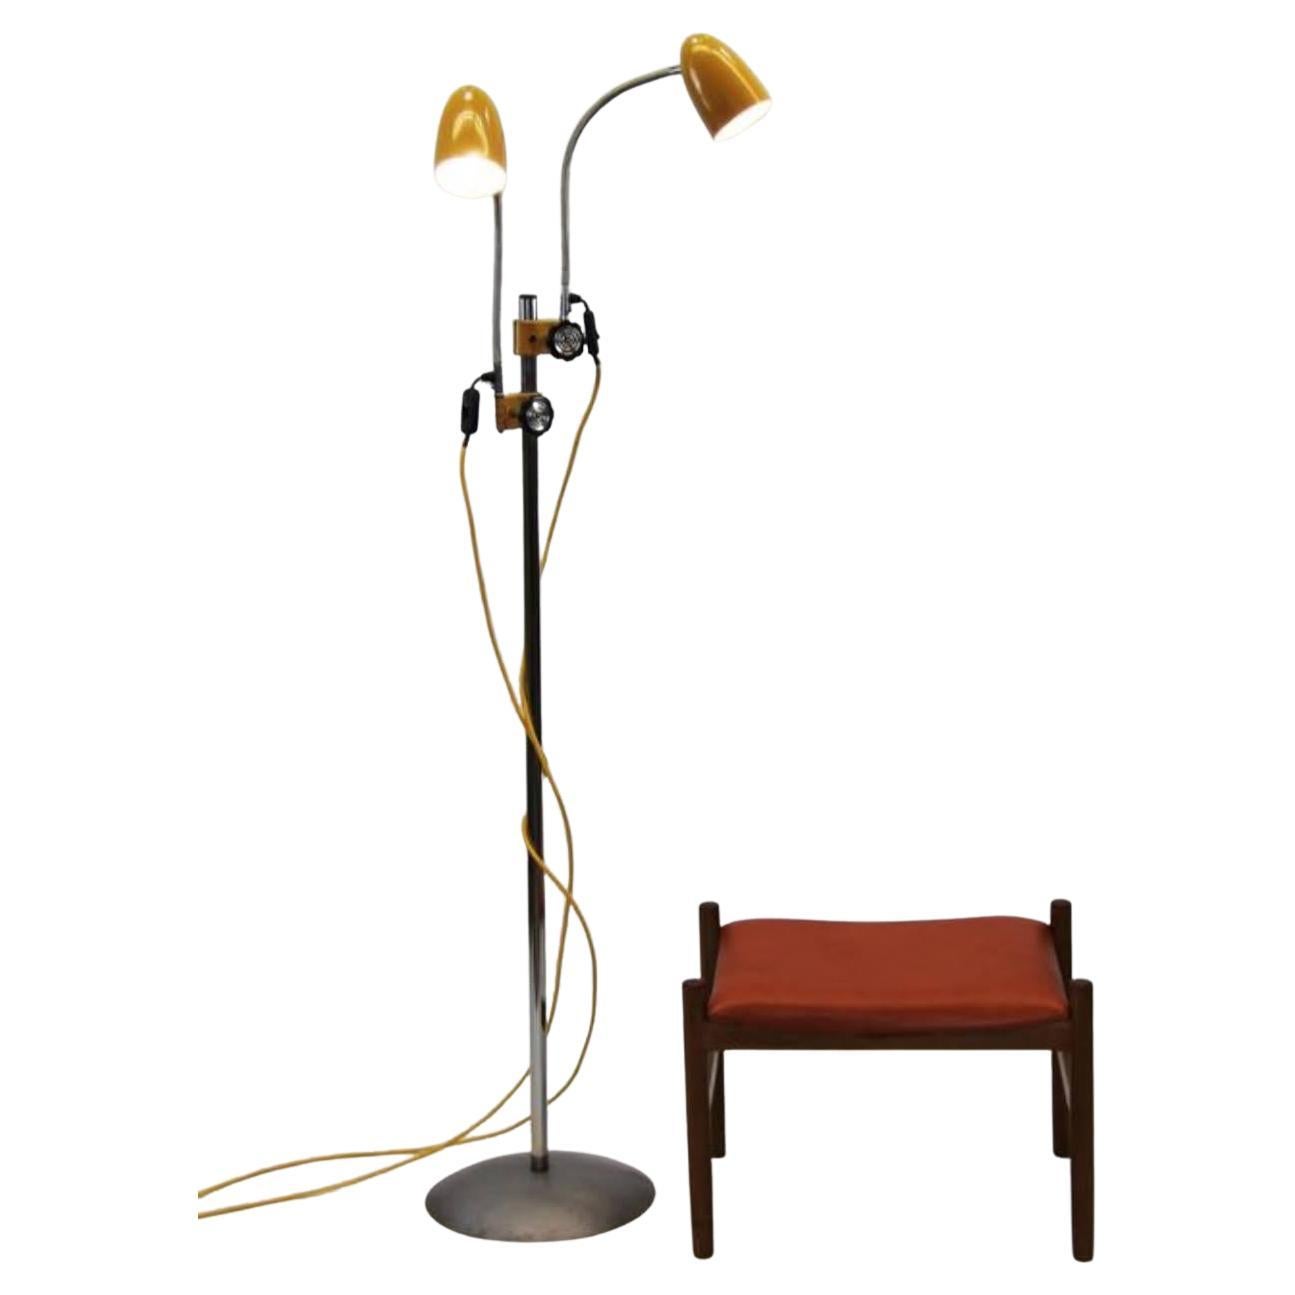 Vintage Mid-Century Floor Lamp with Two "Gooseneck" Lamps from the 50s/60s